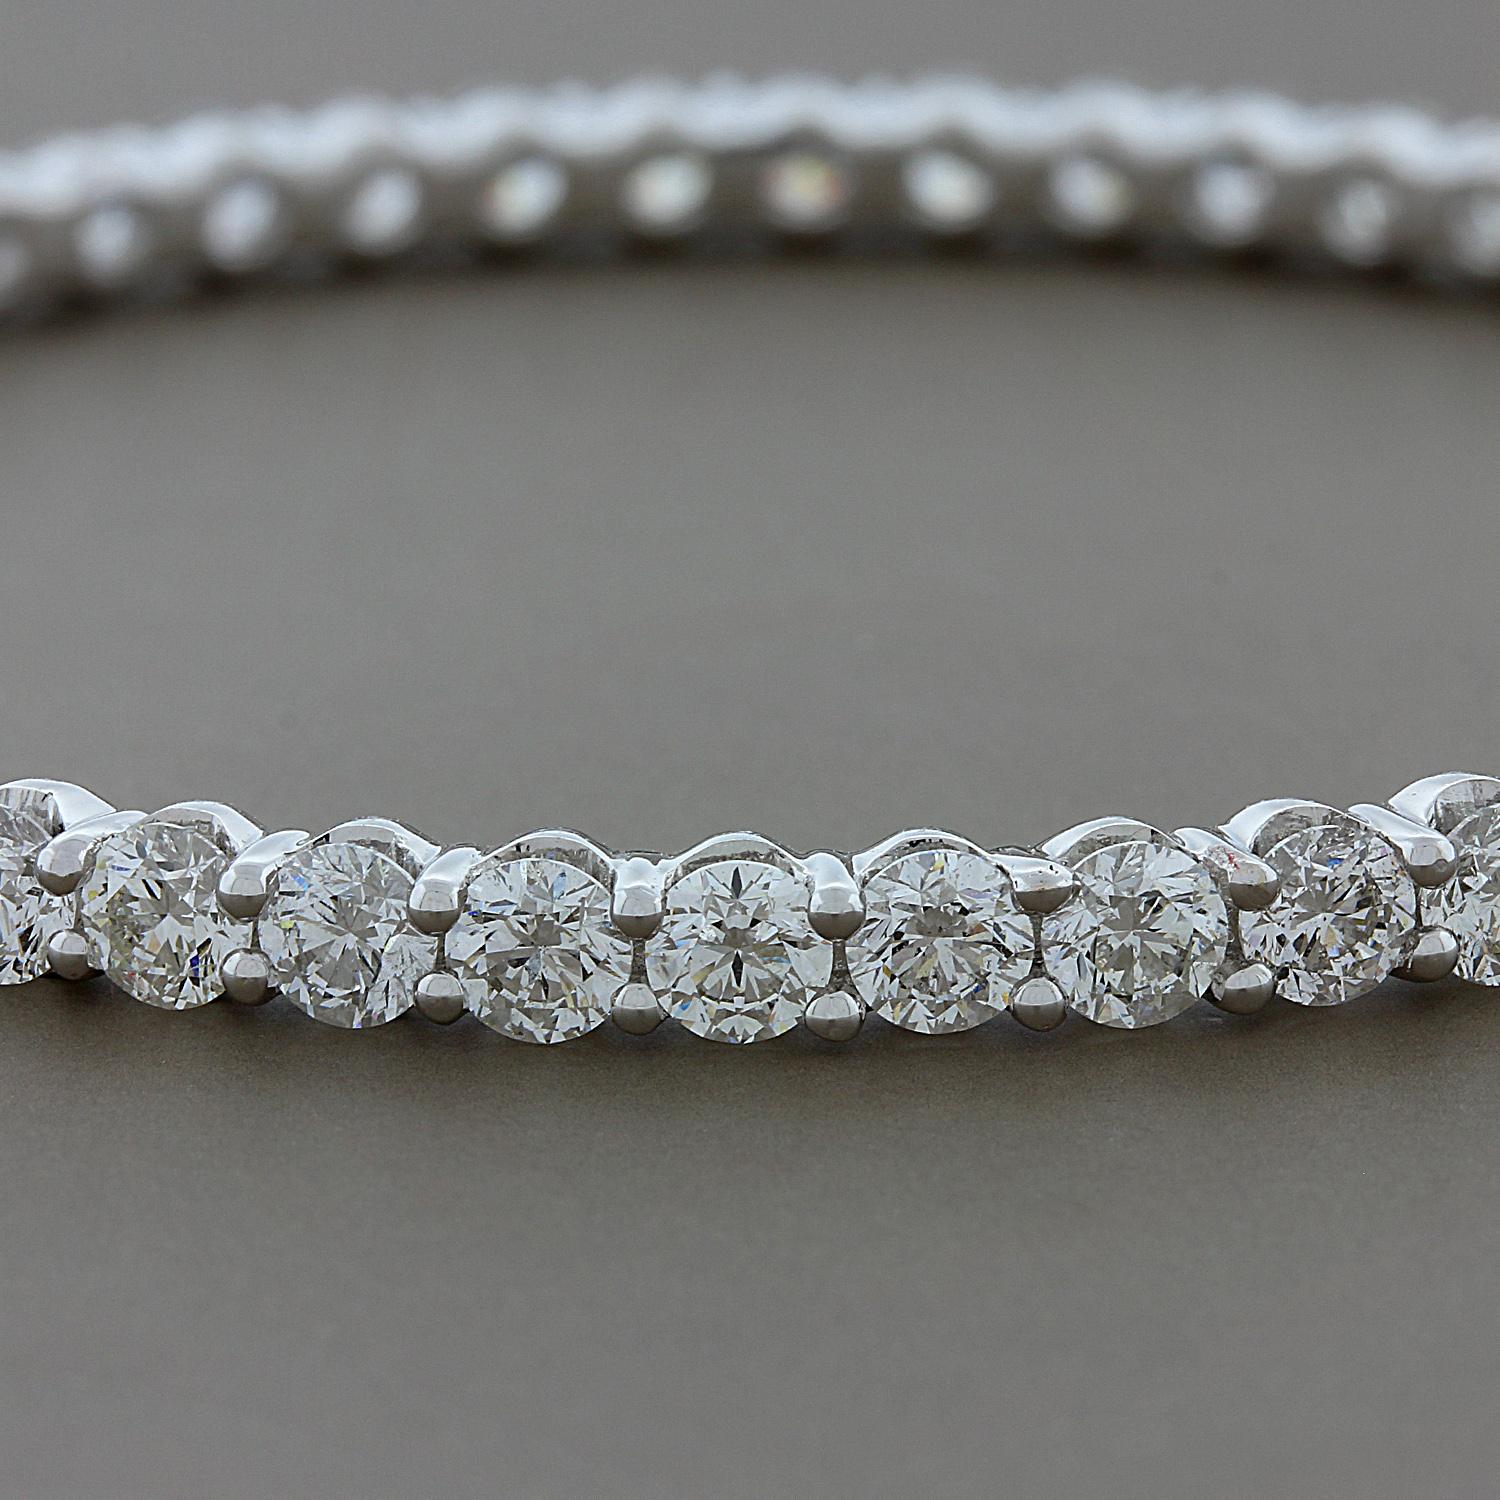 A luxurious eternity bangle showcasing 52 round cut VS quality diamonds weighing 12.98 carats.  The colorless diamonds are set in a classic four prong setting in 18K white gold.  A magnificent bracelet to have sparkling on its own or to stack with